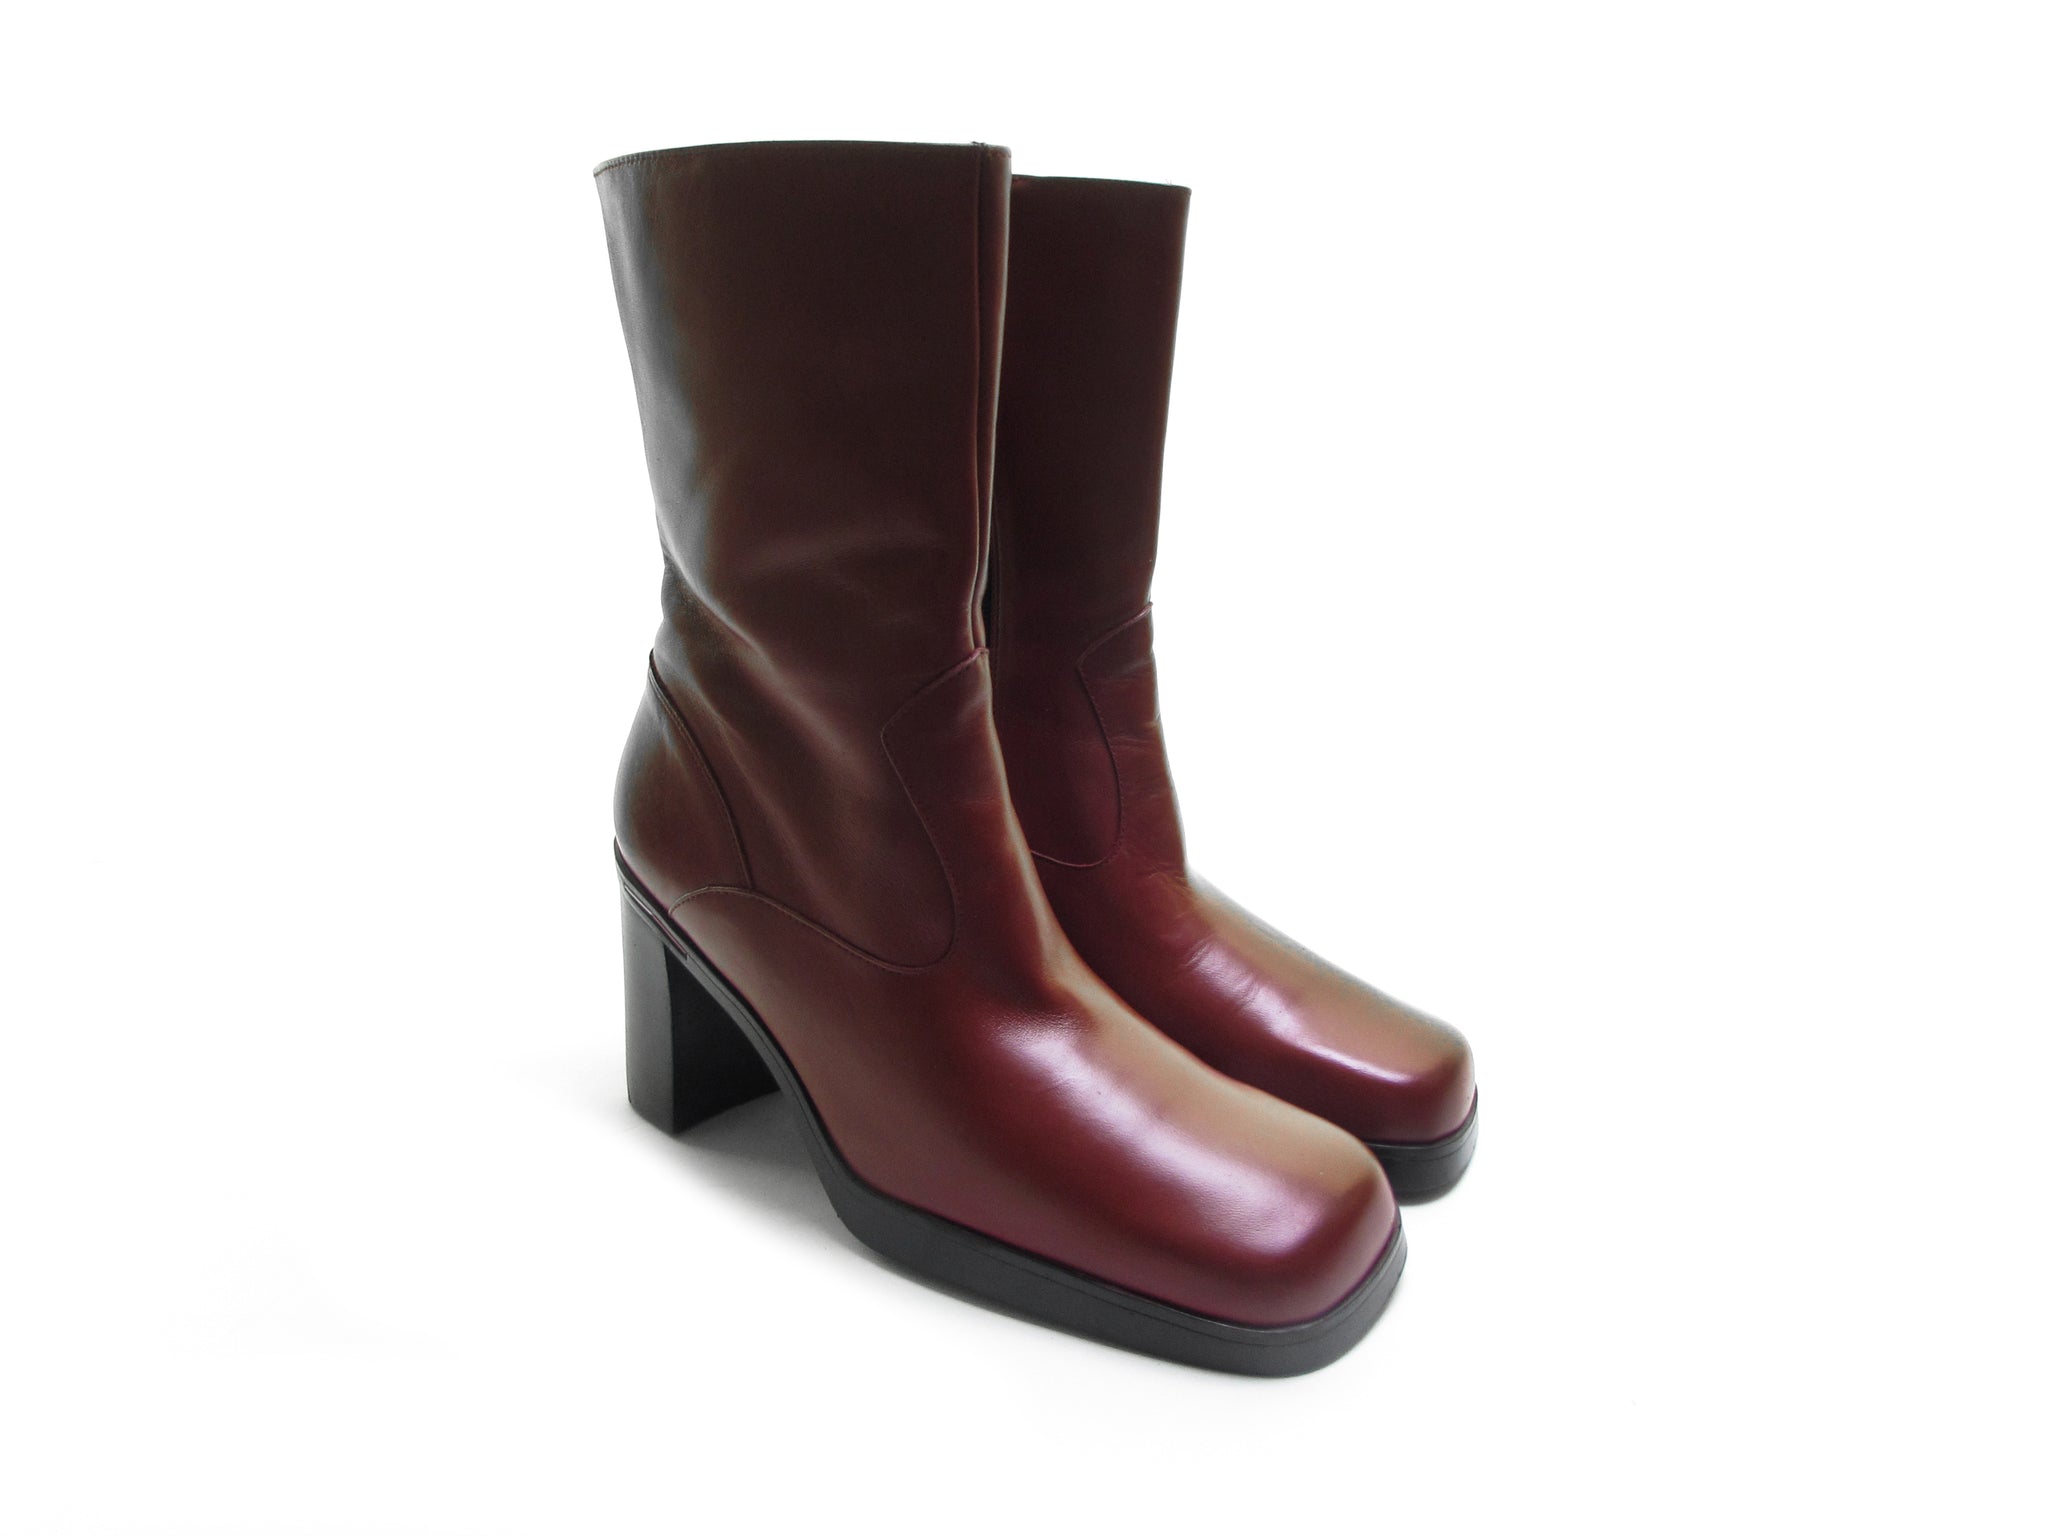 Cherry leather platform ankle boots